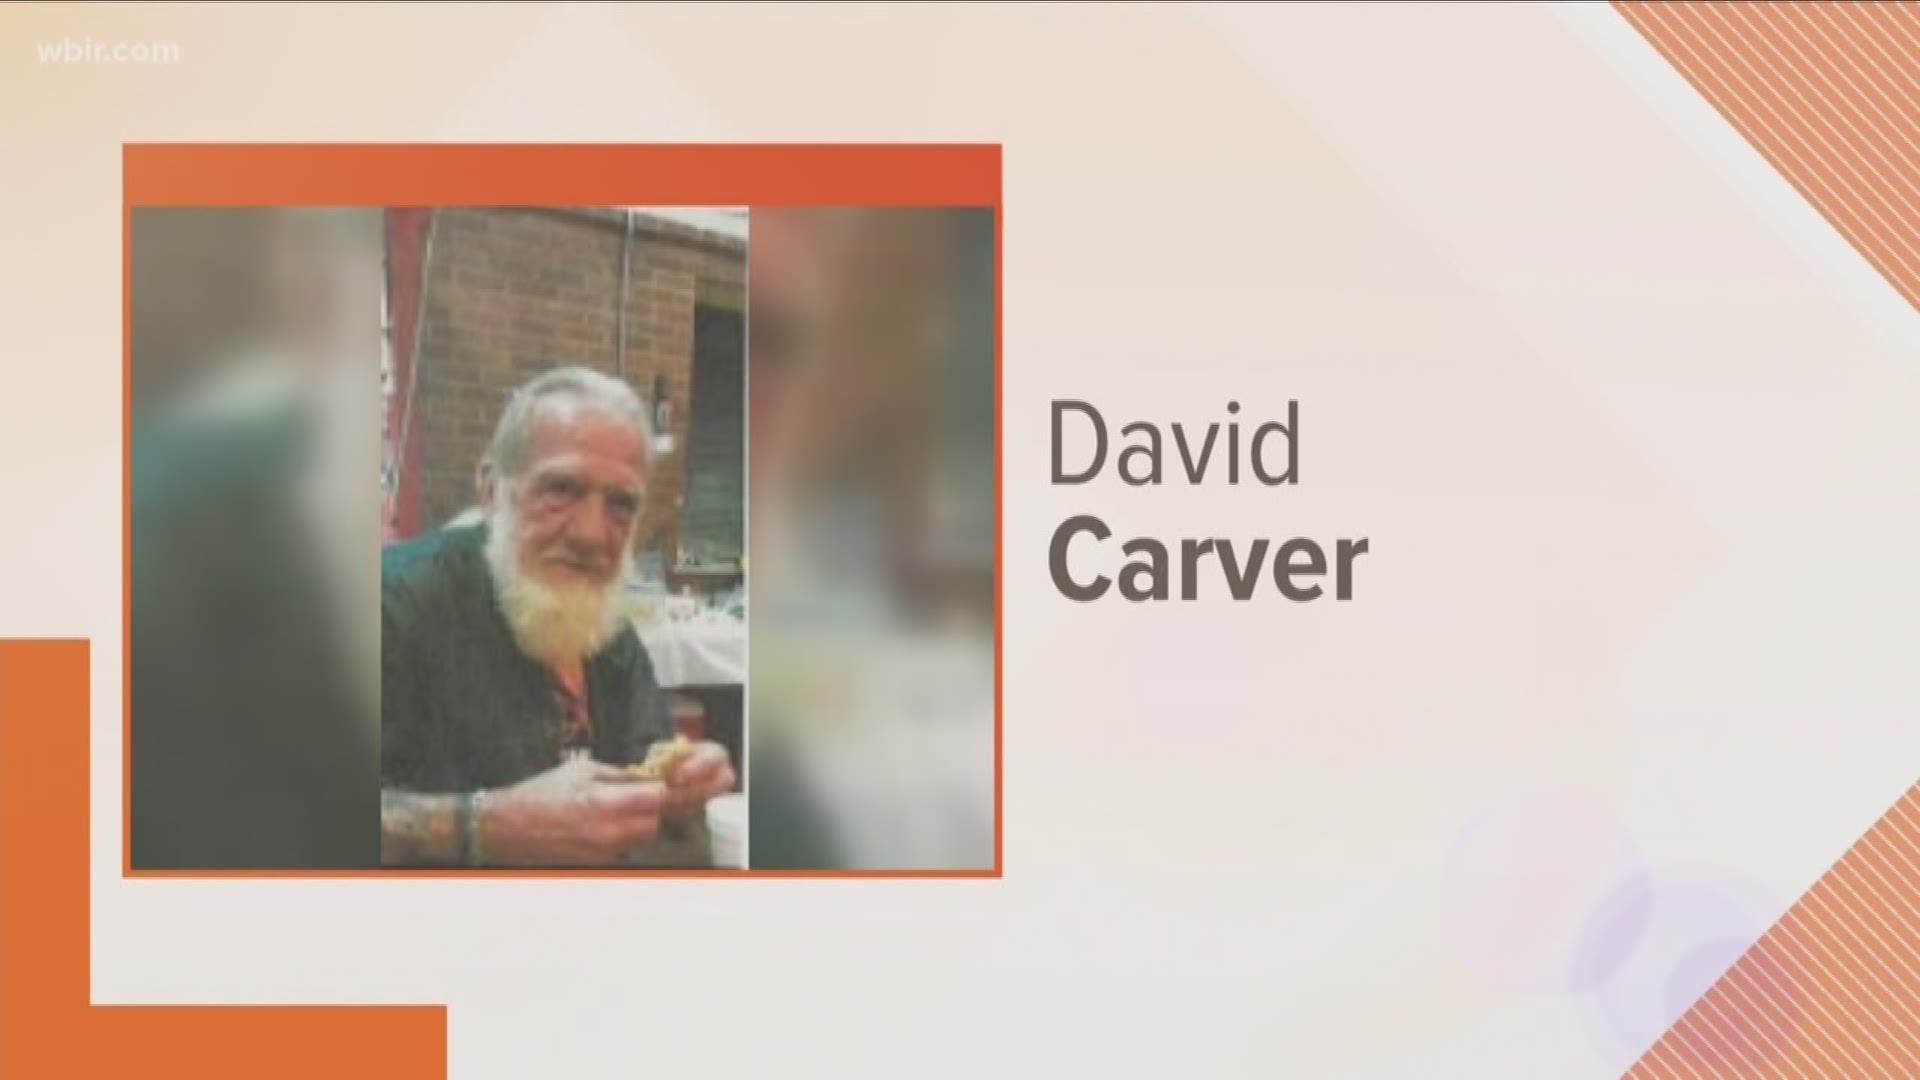 Officials identified human remains found in the Great Smoky Mountains as a missing Blount County man on Friday. Park officials say an off-trail hiker found the remains of 64-year-old David J. Carver on Monday.